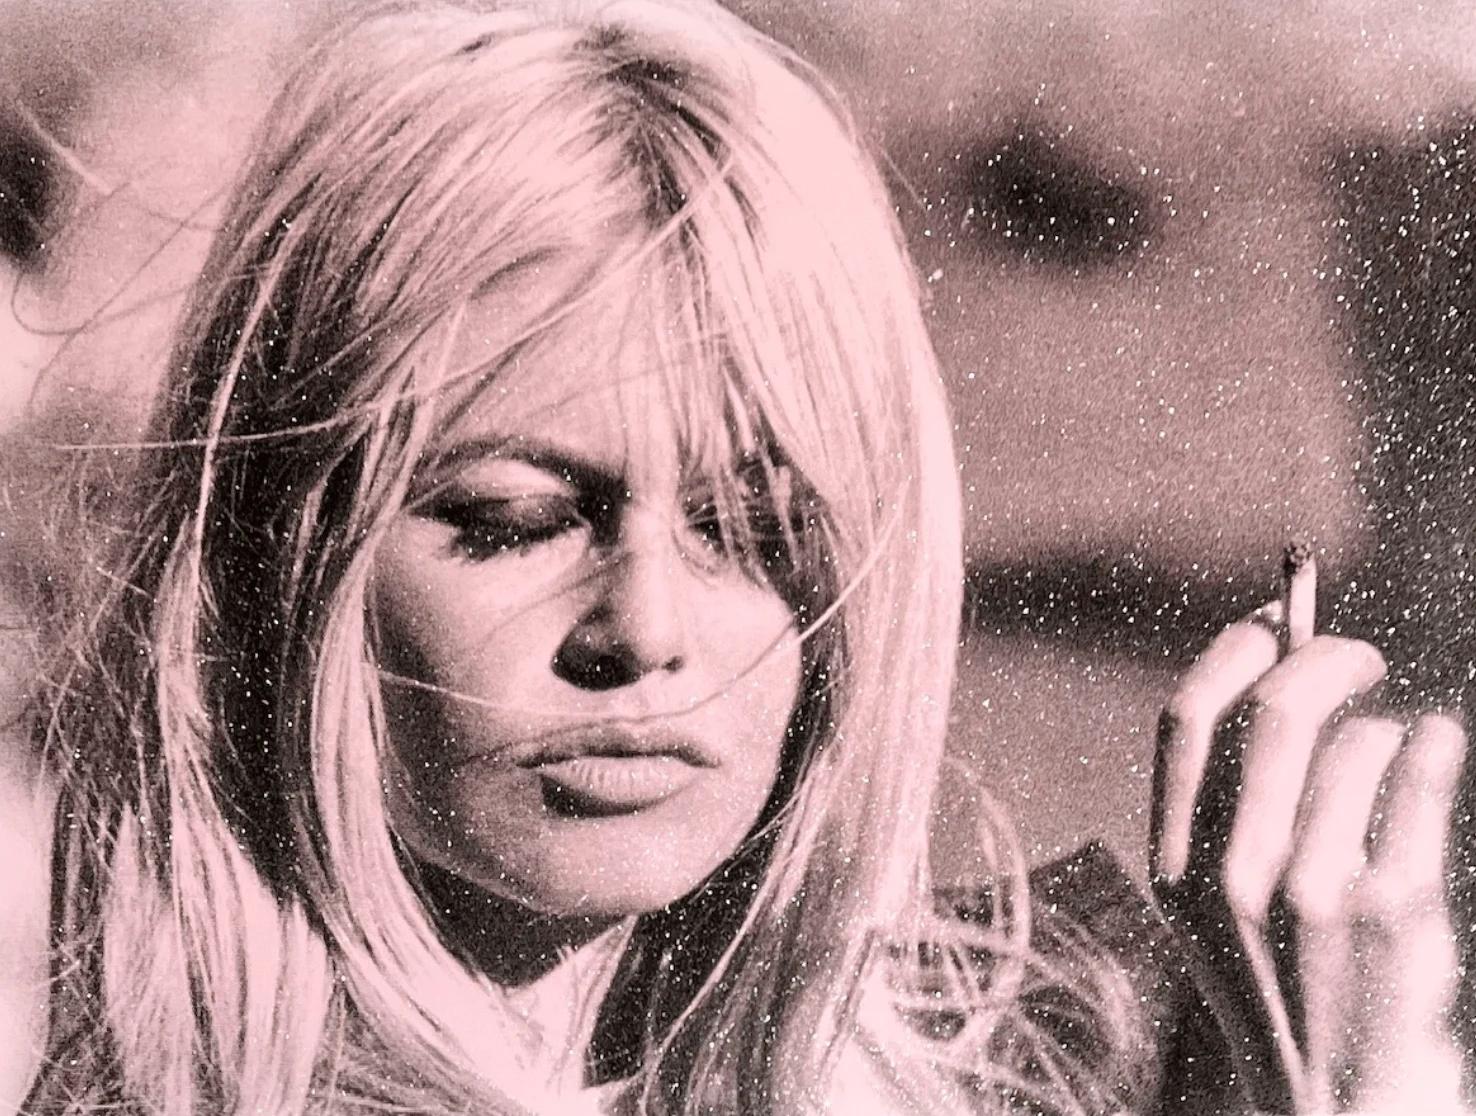 Bardot Thunder, Bruised Pink - Painting by Russell Young